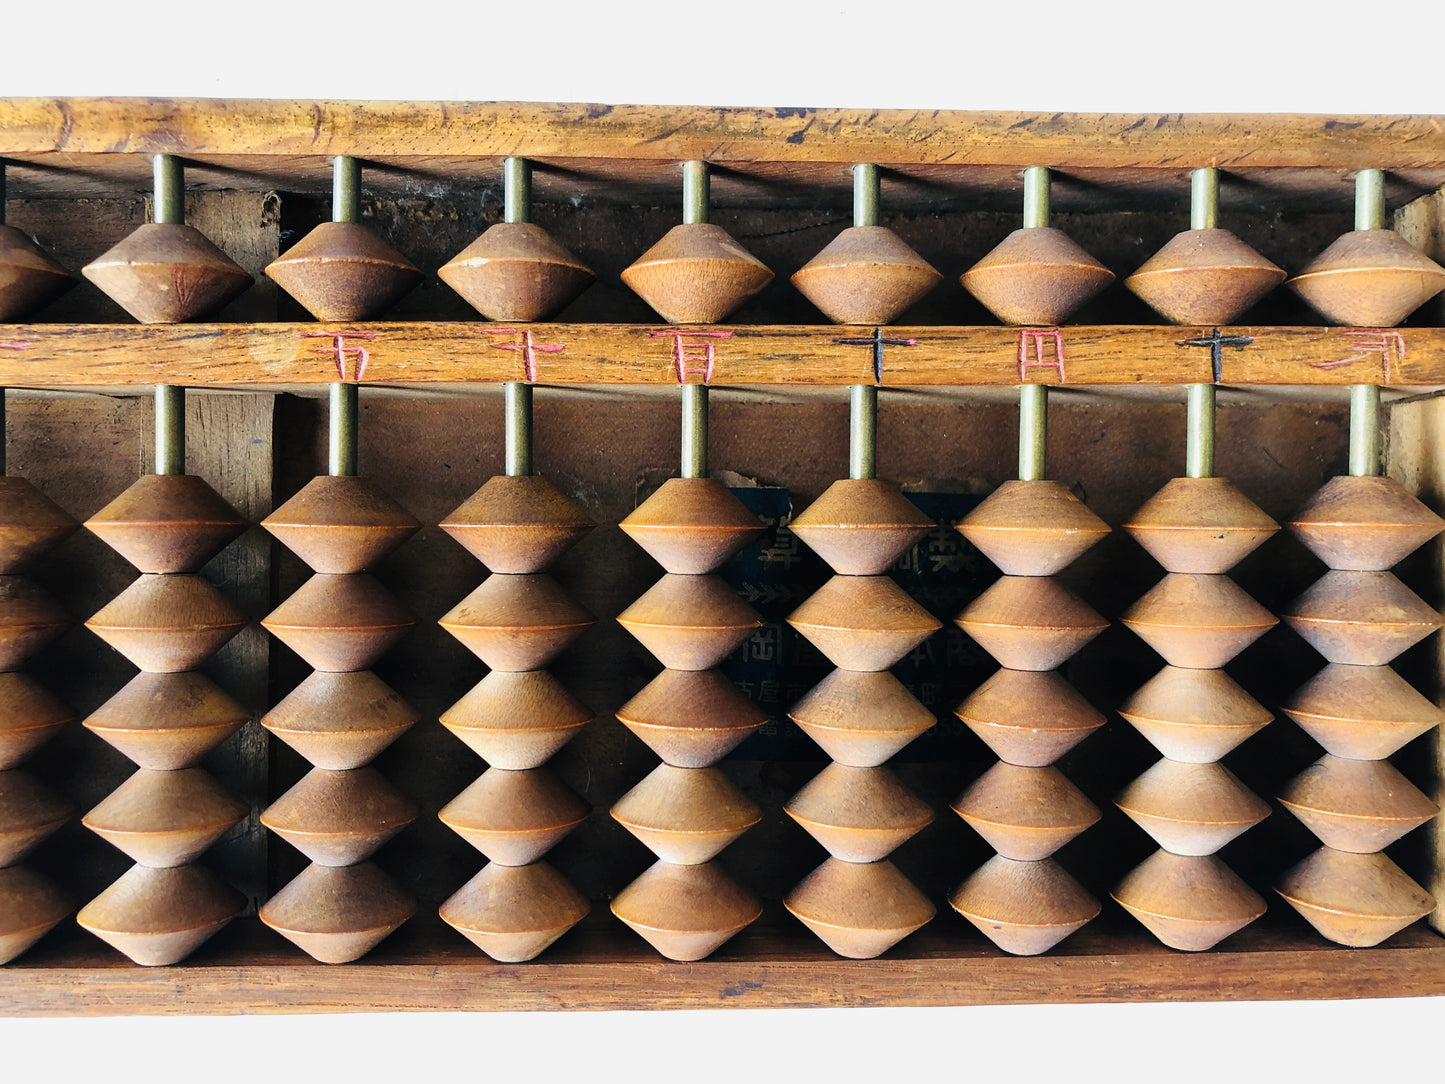 Y4396 SOROBAN 2 wooden Abacus abacuses abaci Japan antique math counting machine